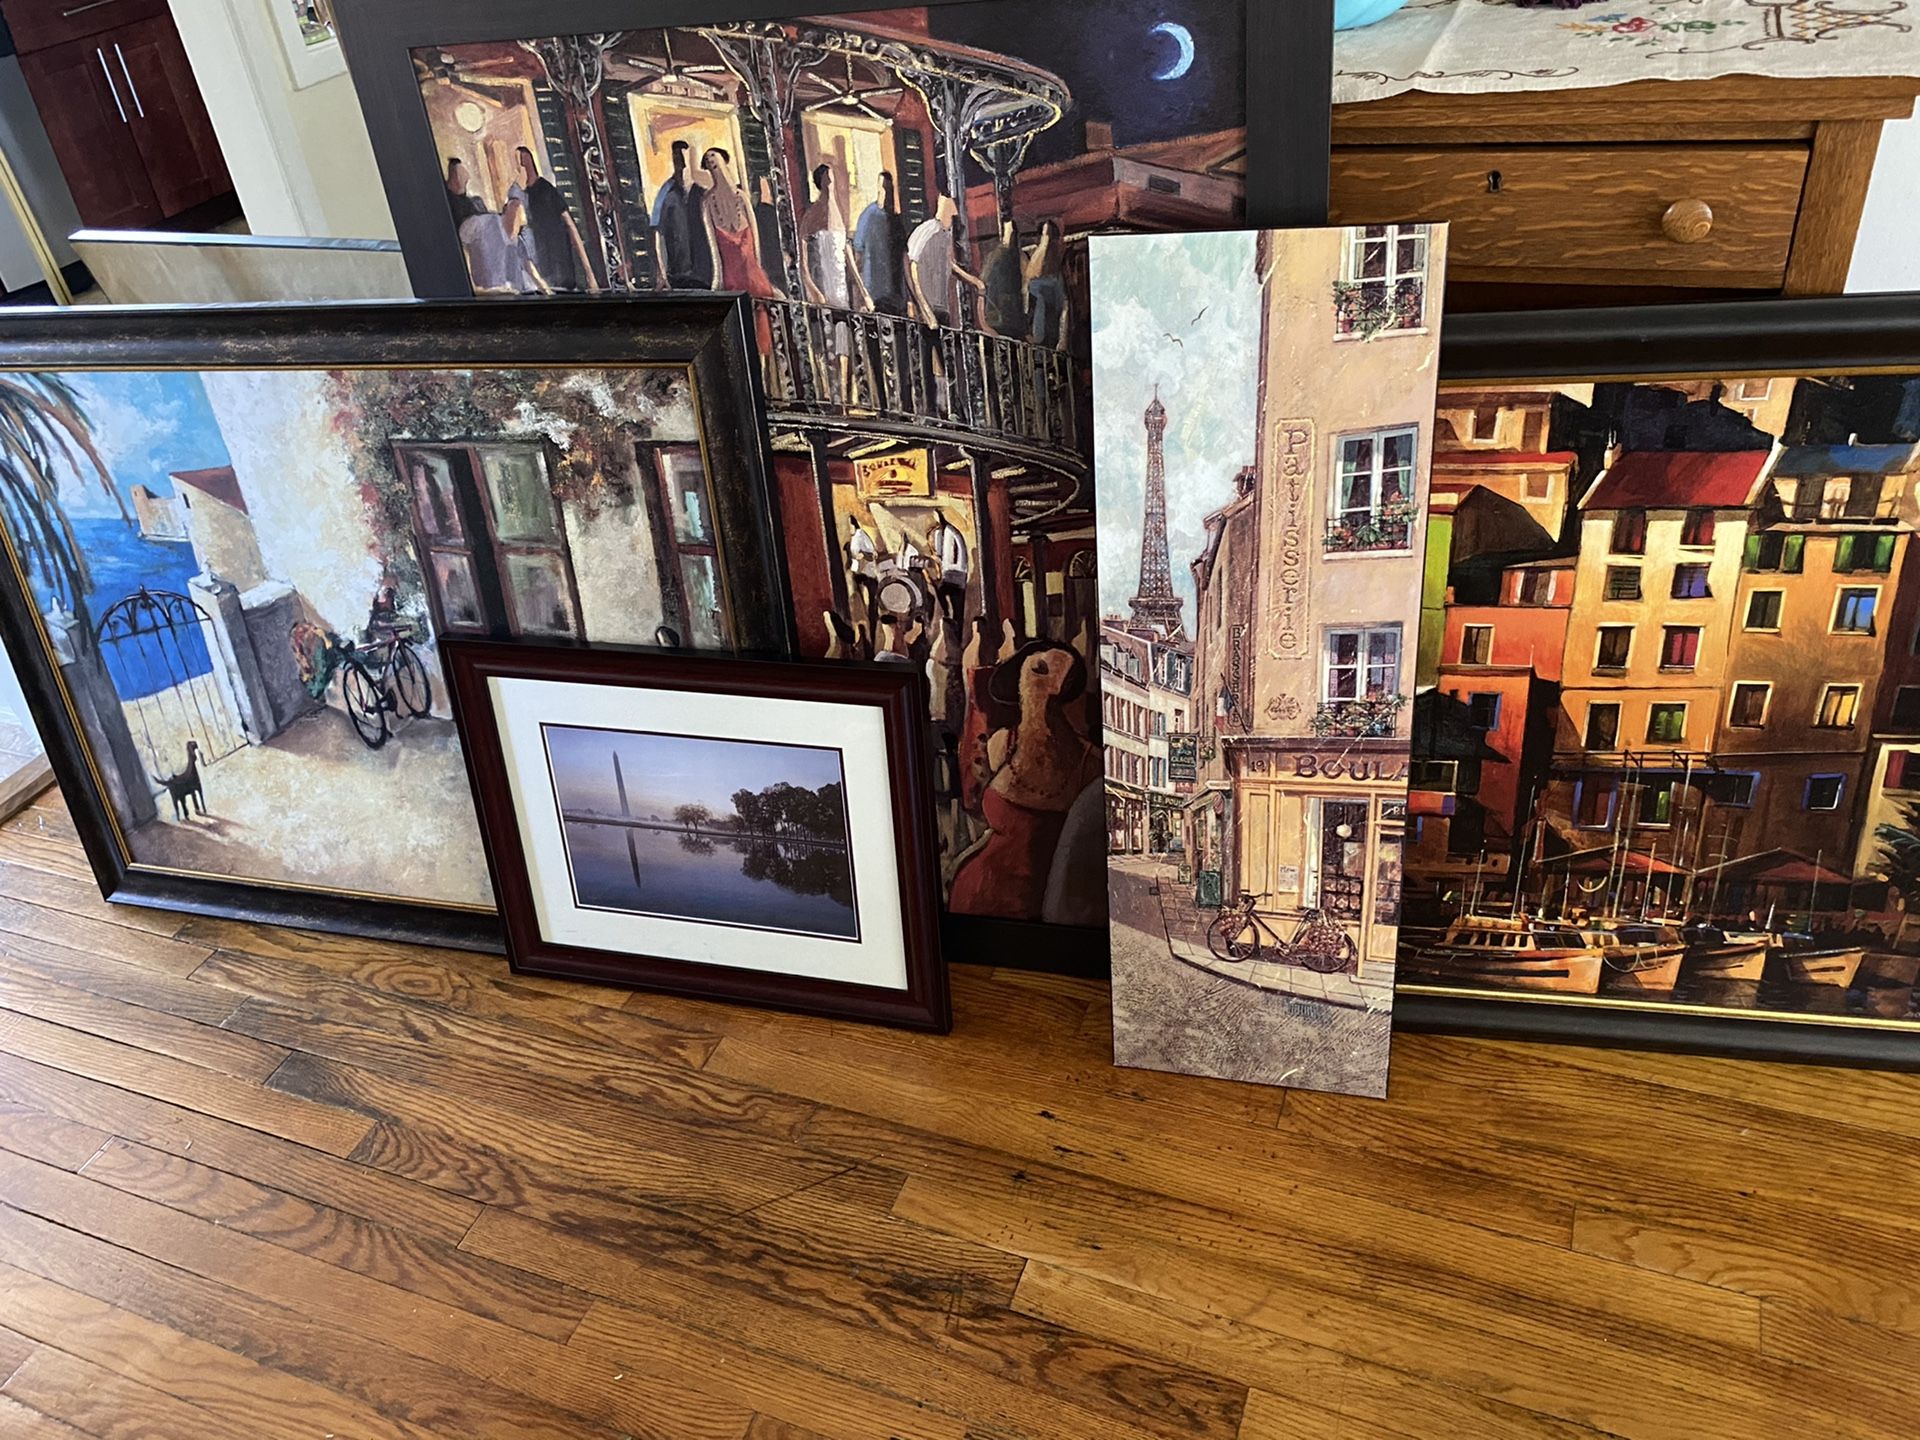 ***FREE*** Lot of 6 framed pictures/paintings